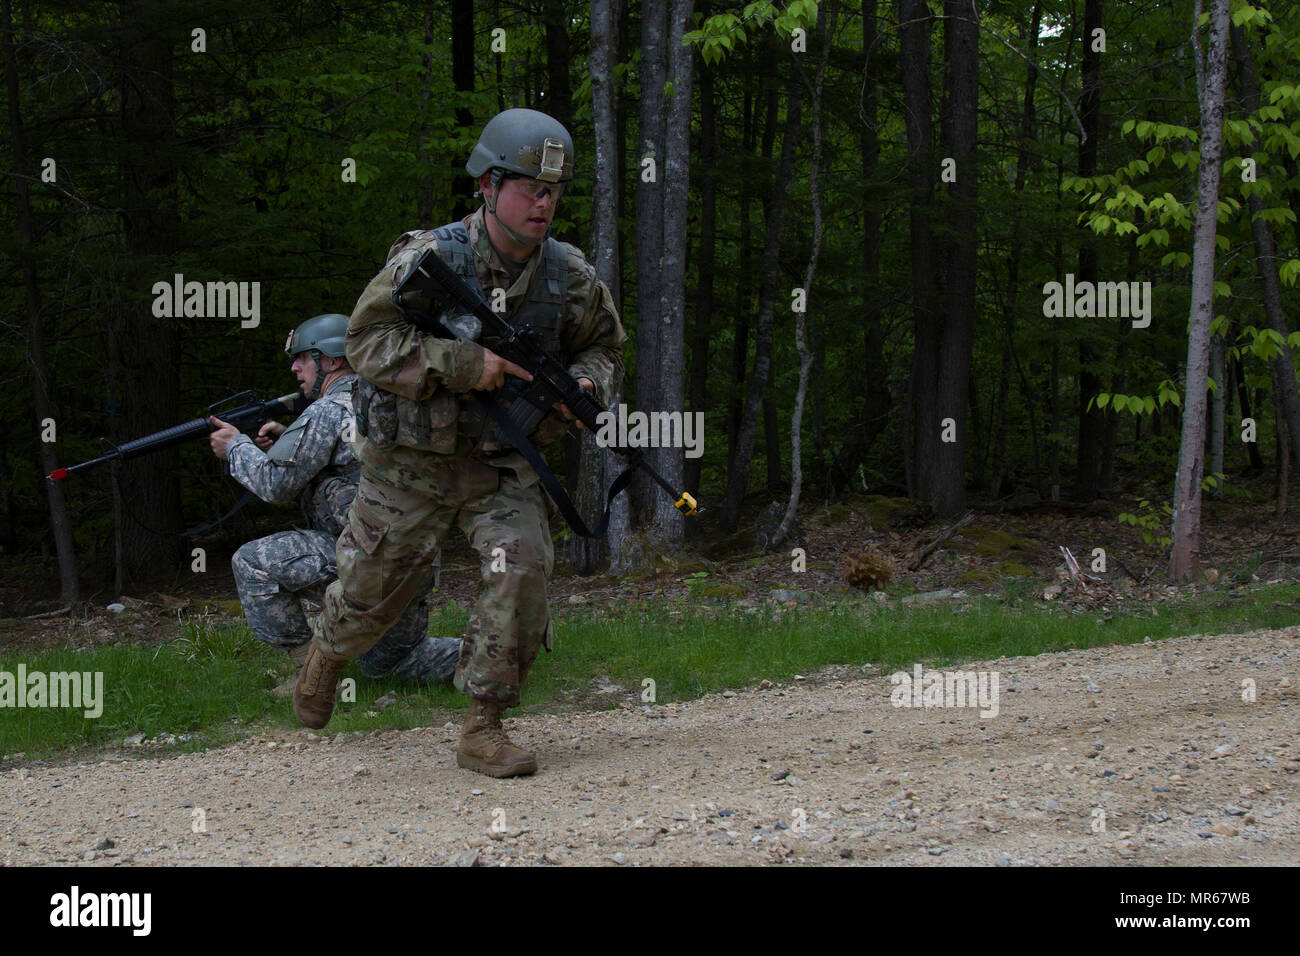 A U.S. Army officer candidate crosses a linear danger area (road) during a reconnaissance operations lane at New Hampshire National Guard Training Site in Center Strafford, Nh., May 19, 2017. Soldiers from Connecticut, Maine, Massachusetts, New Hampshire, New Jersey, New York, Rhode Island, and Vermont participated in the Officer Candidate School Field Leadership Exercise in preparation for graduation and commission. (U.S. Army National Guard photo by Spc. Avery Cunningham) Stock Photo